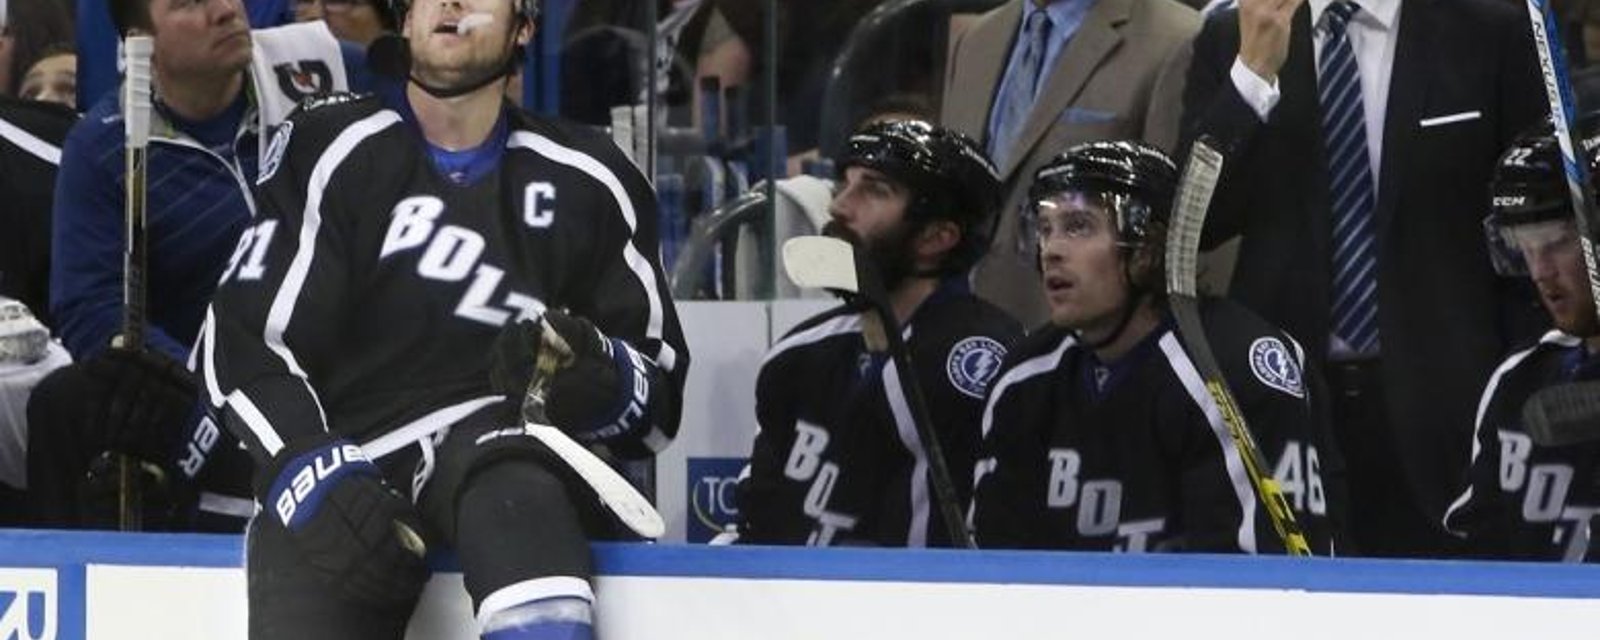 Former Lightning GM believes Stamkos is interested in two Canadian teams.